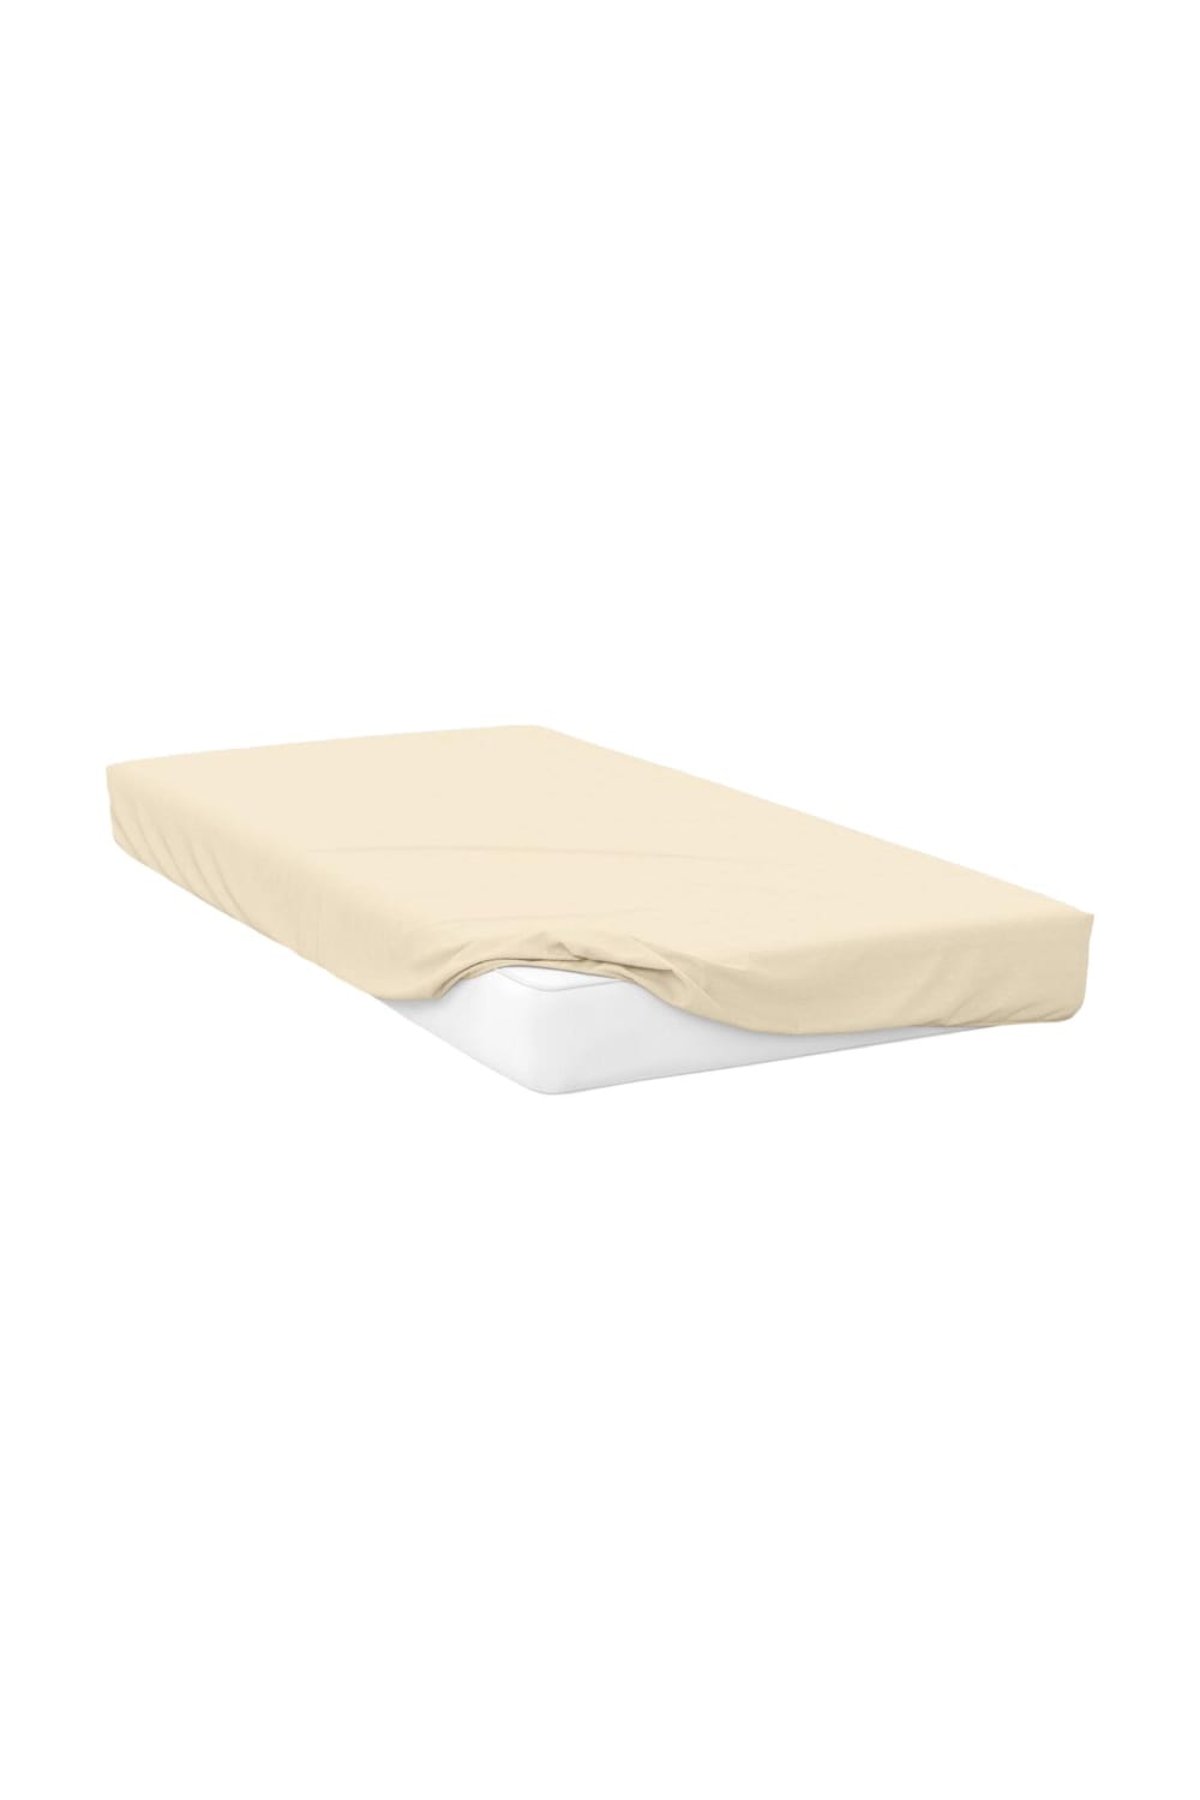 Belledorm 100% Cotton Jersey Memory Foam Fitted Sheet All Sizes and Depths Ivory 